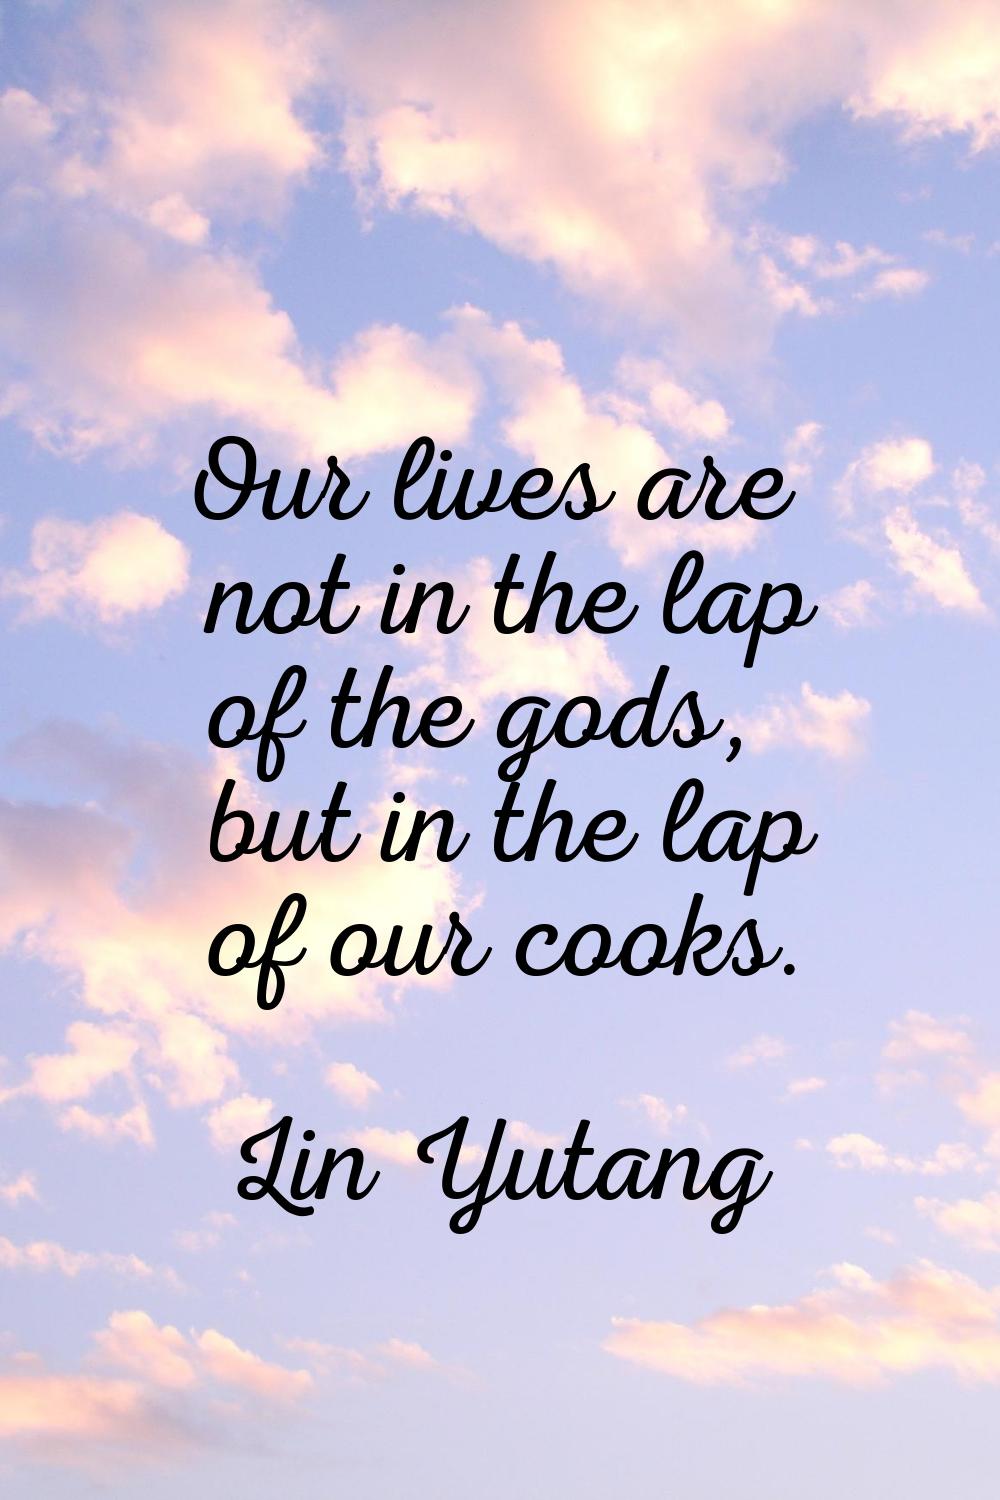 Our lives are not in the lap of the gods, but in the lap of our cooks.